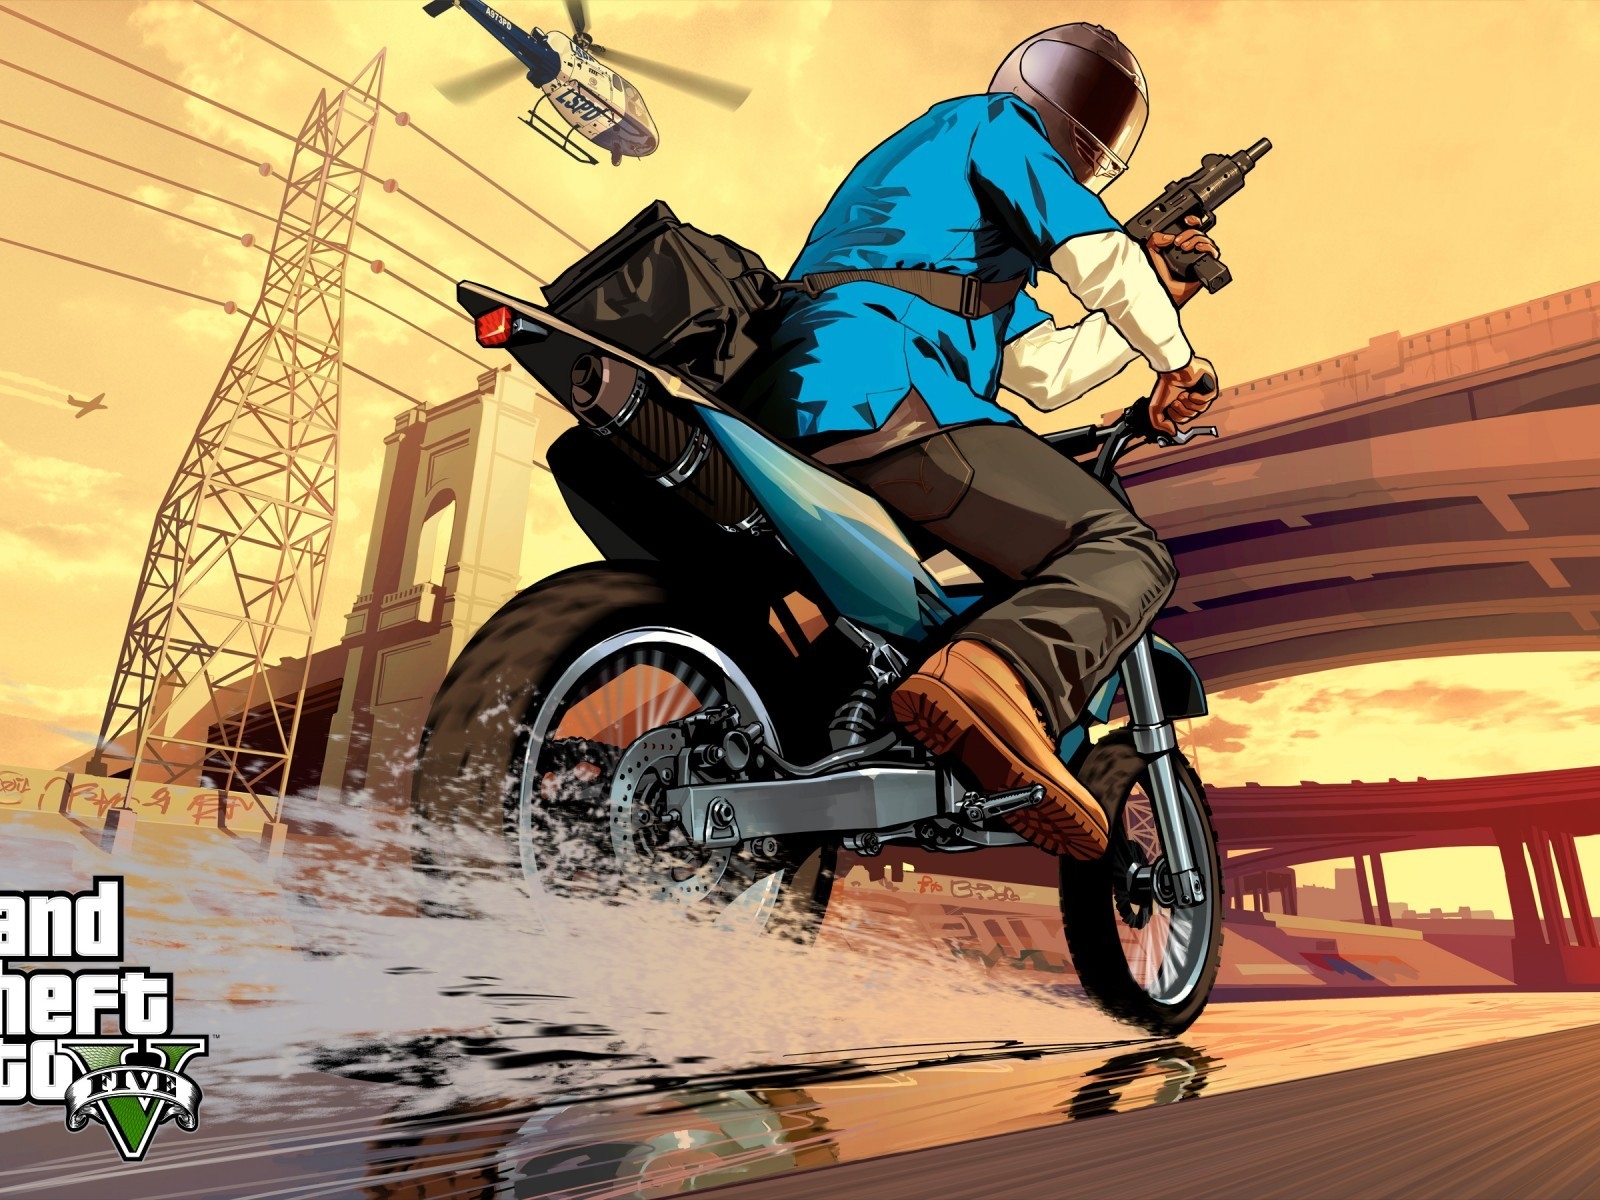 Grand Theft Auto V Poster for 1600 x 1200 resolution